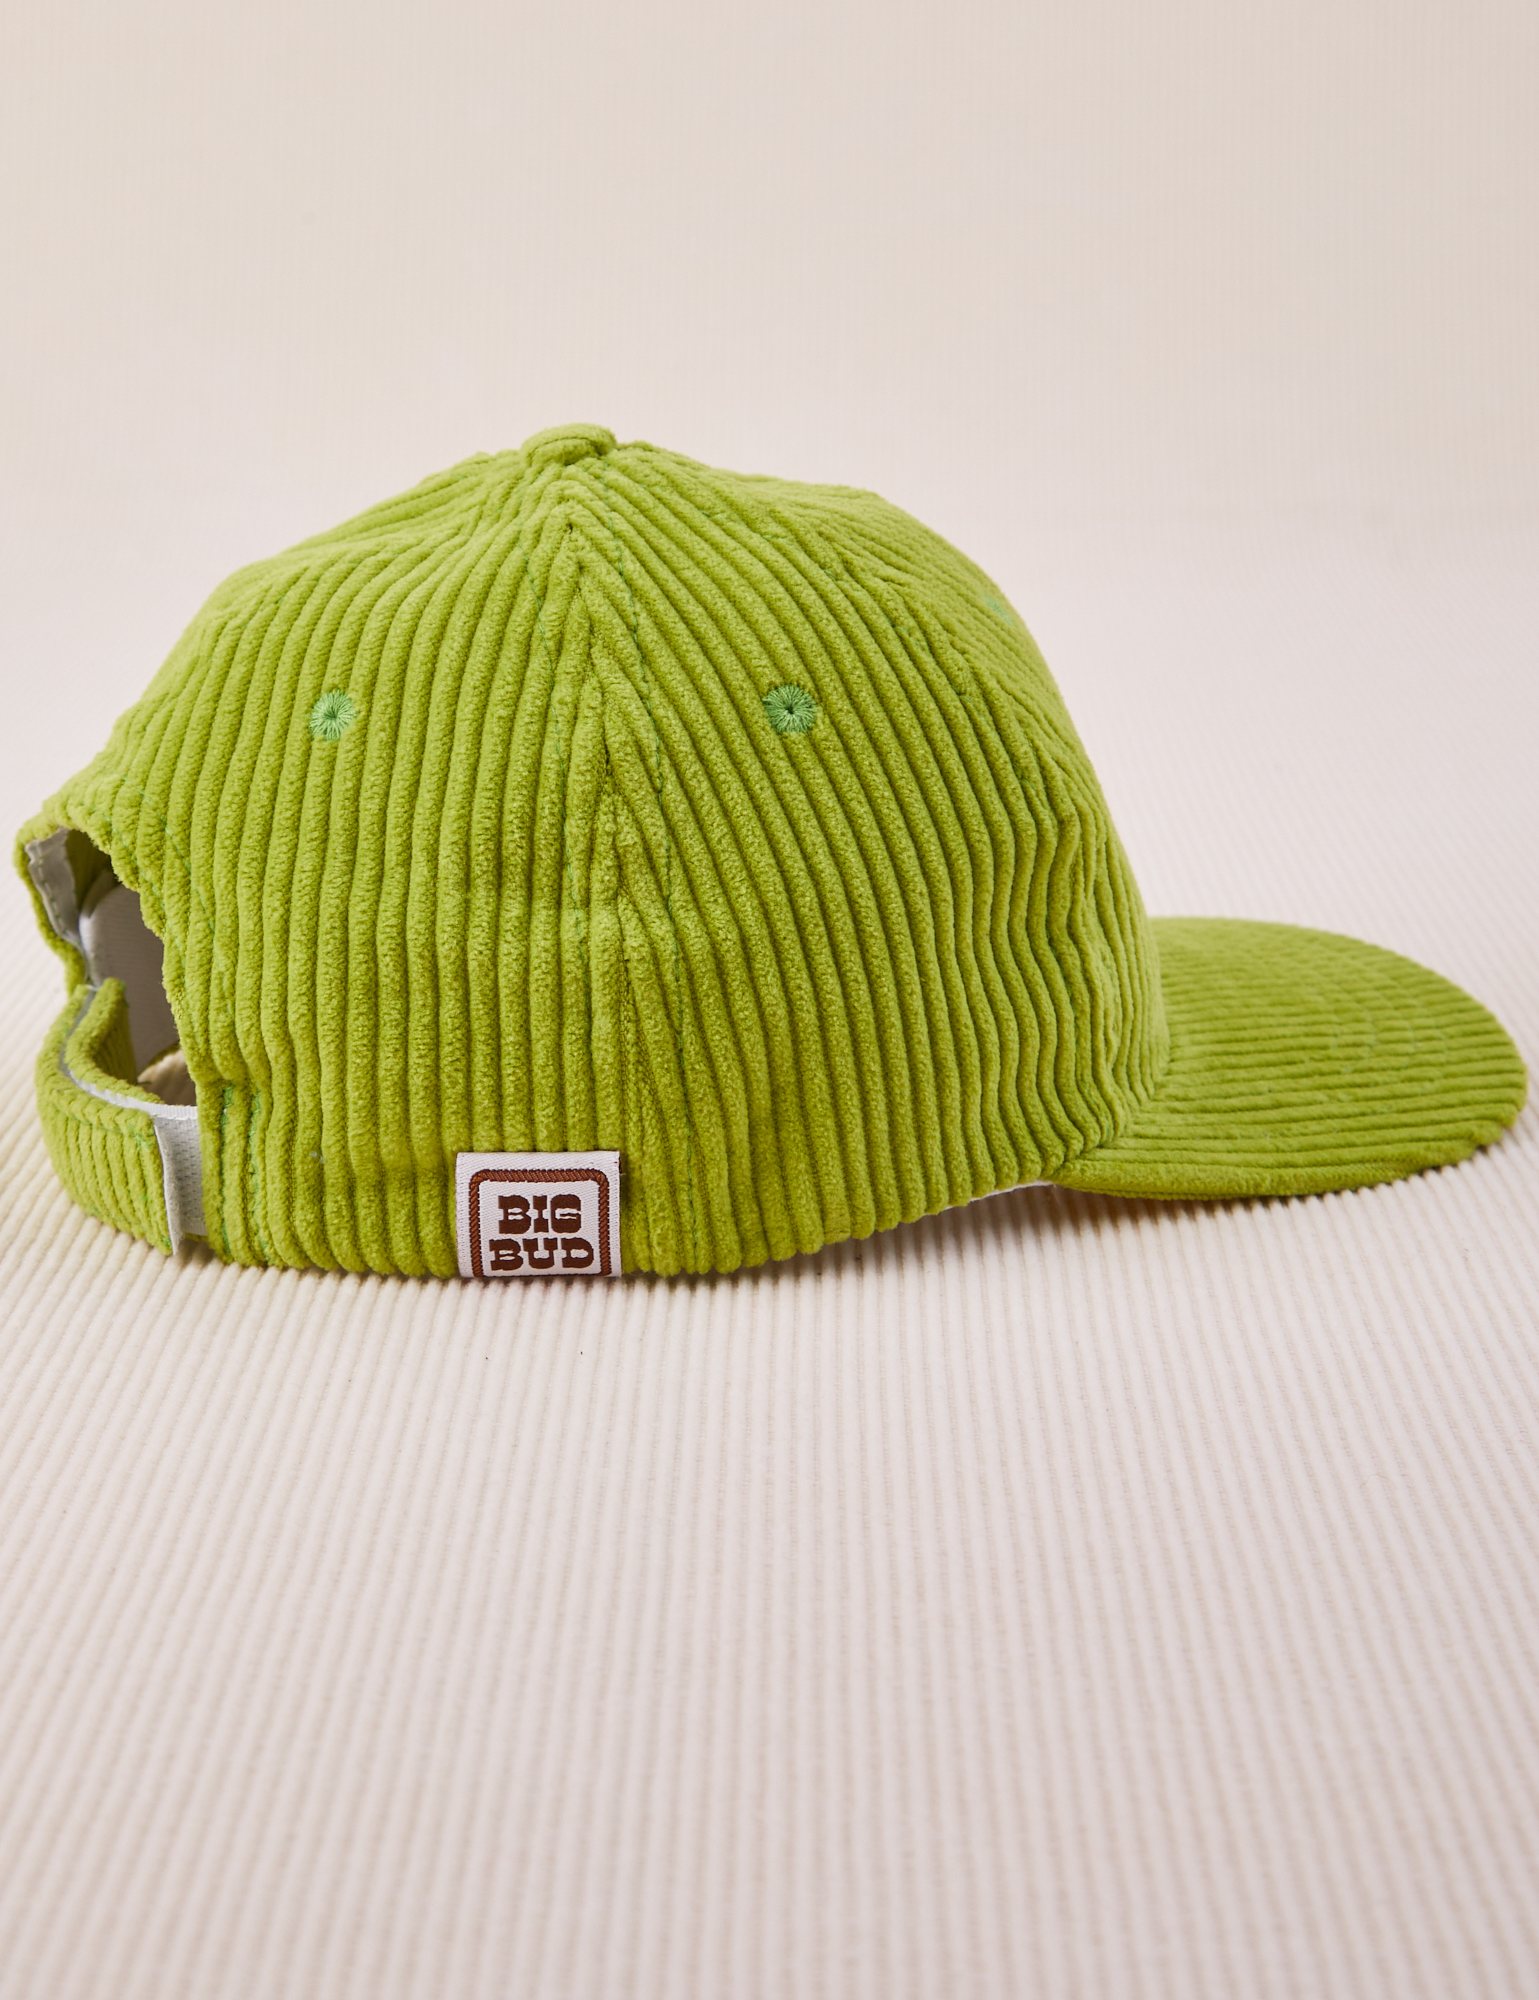 Side view of Dugout Corduroy Hat in Gross Green. Big Bud label sewn on edge of hat.